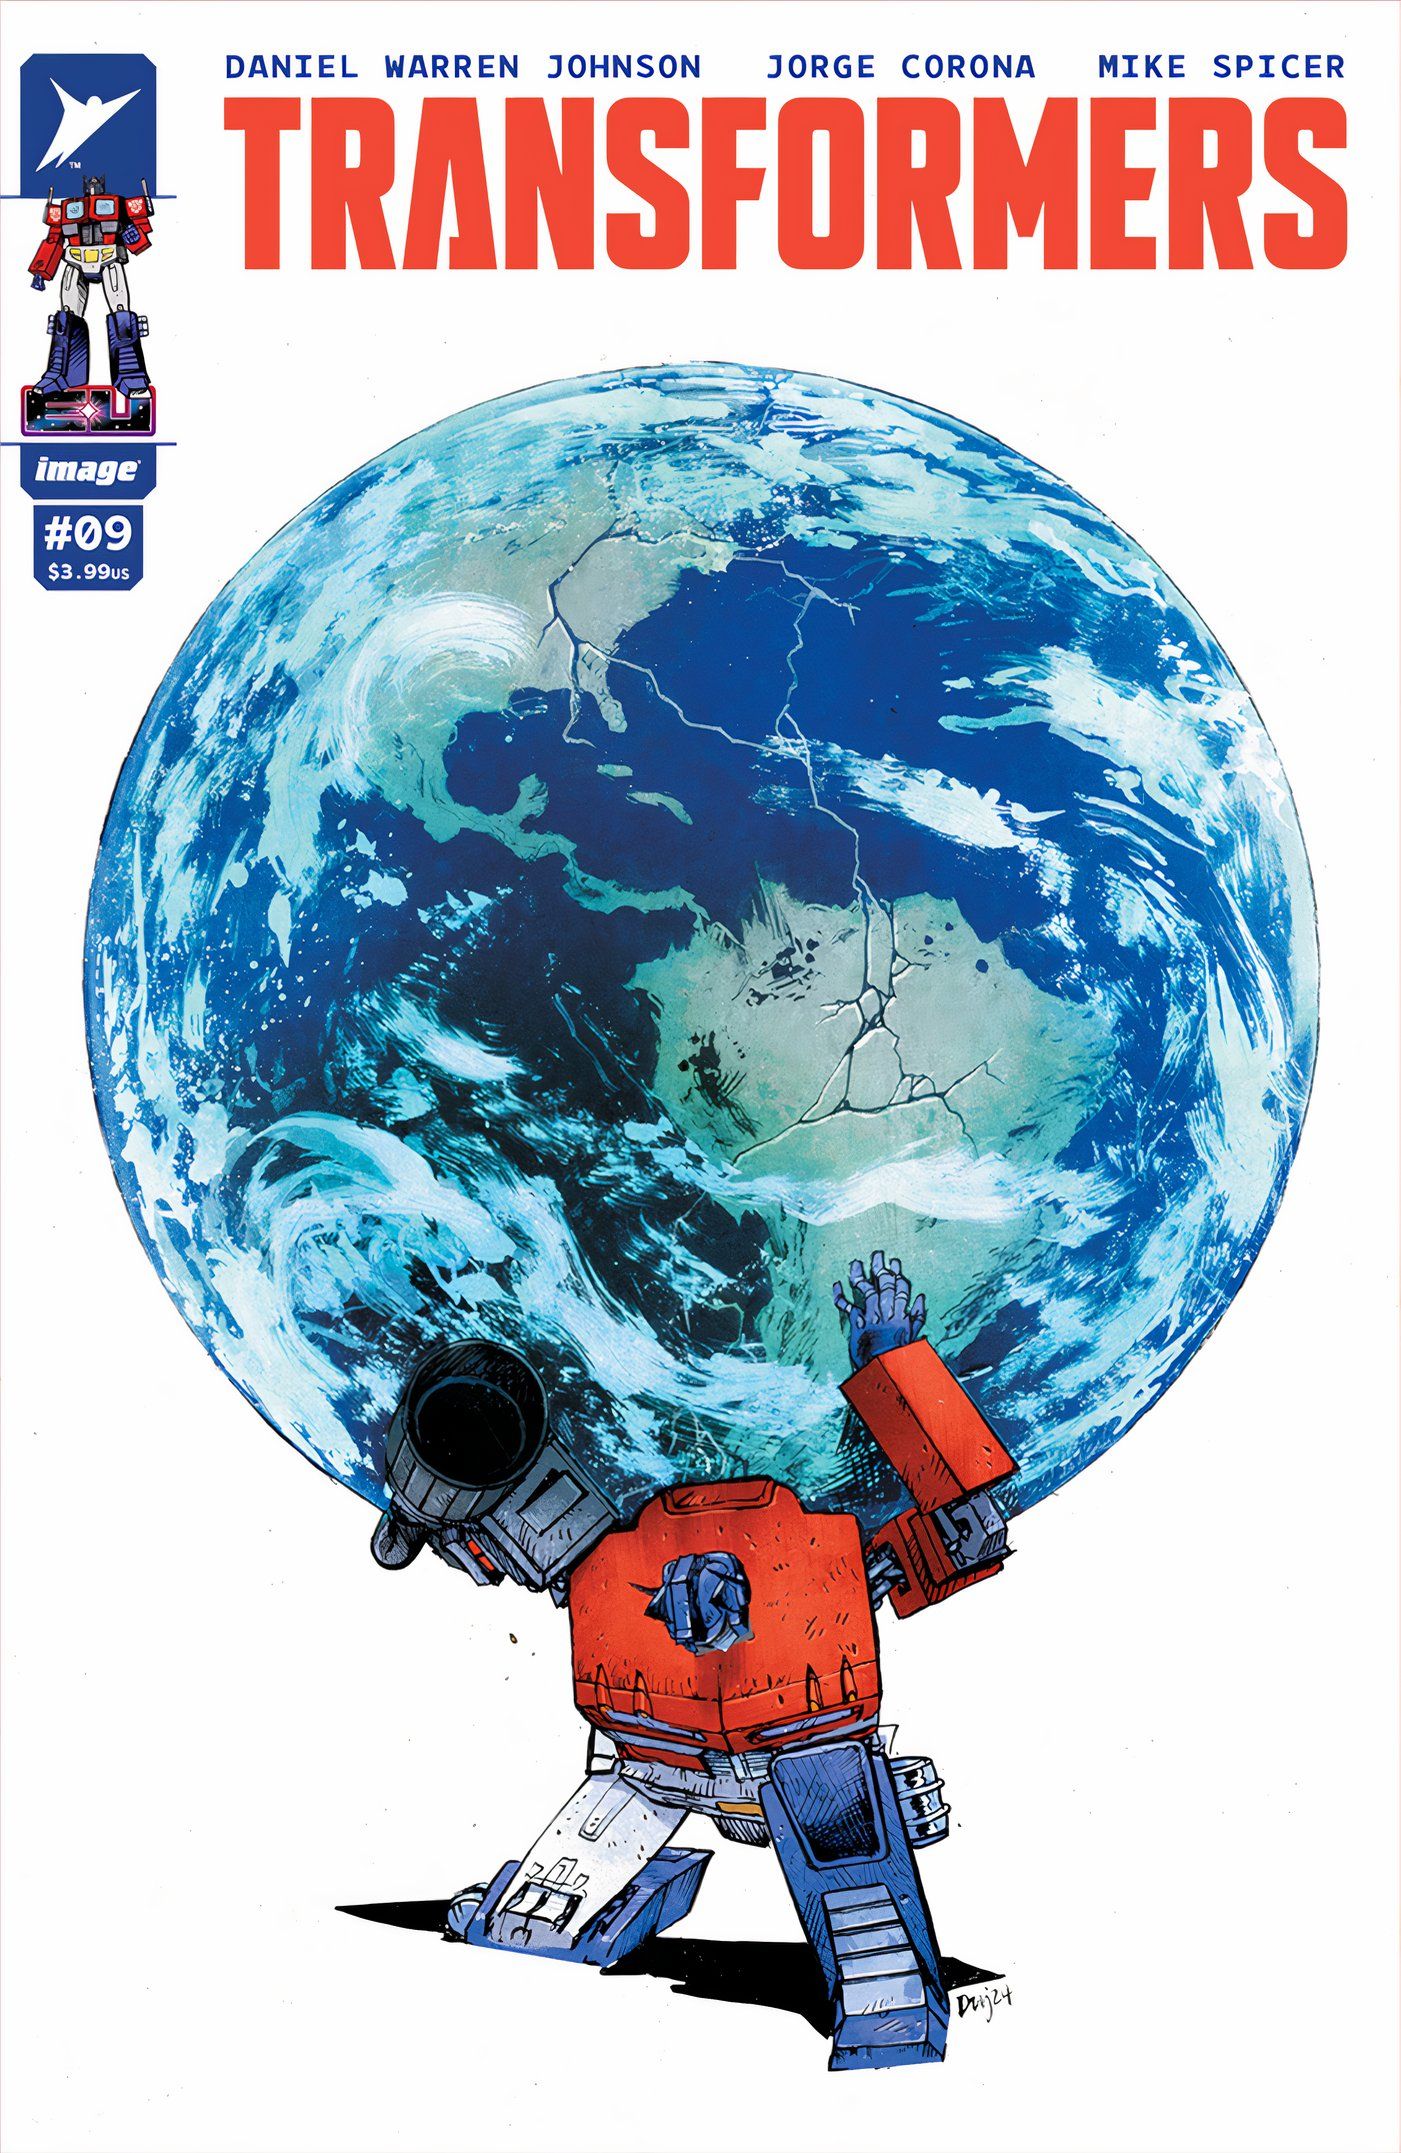 Transformers #9 Cover, Optimus Prime holding up the world on his shoulders like Atlas.